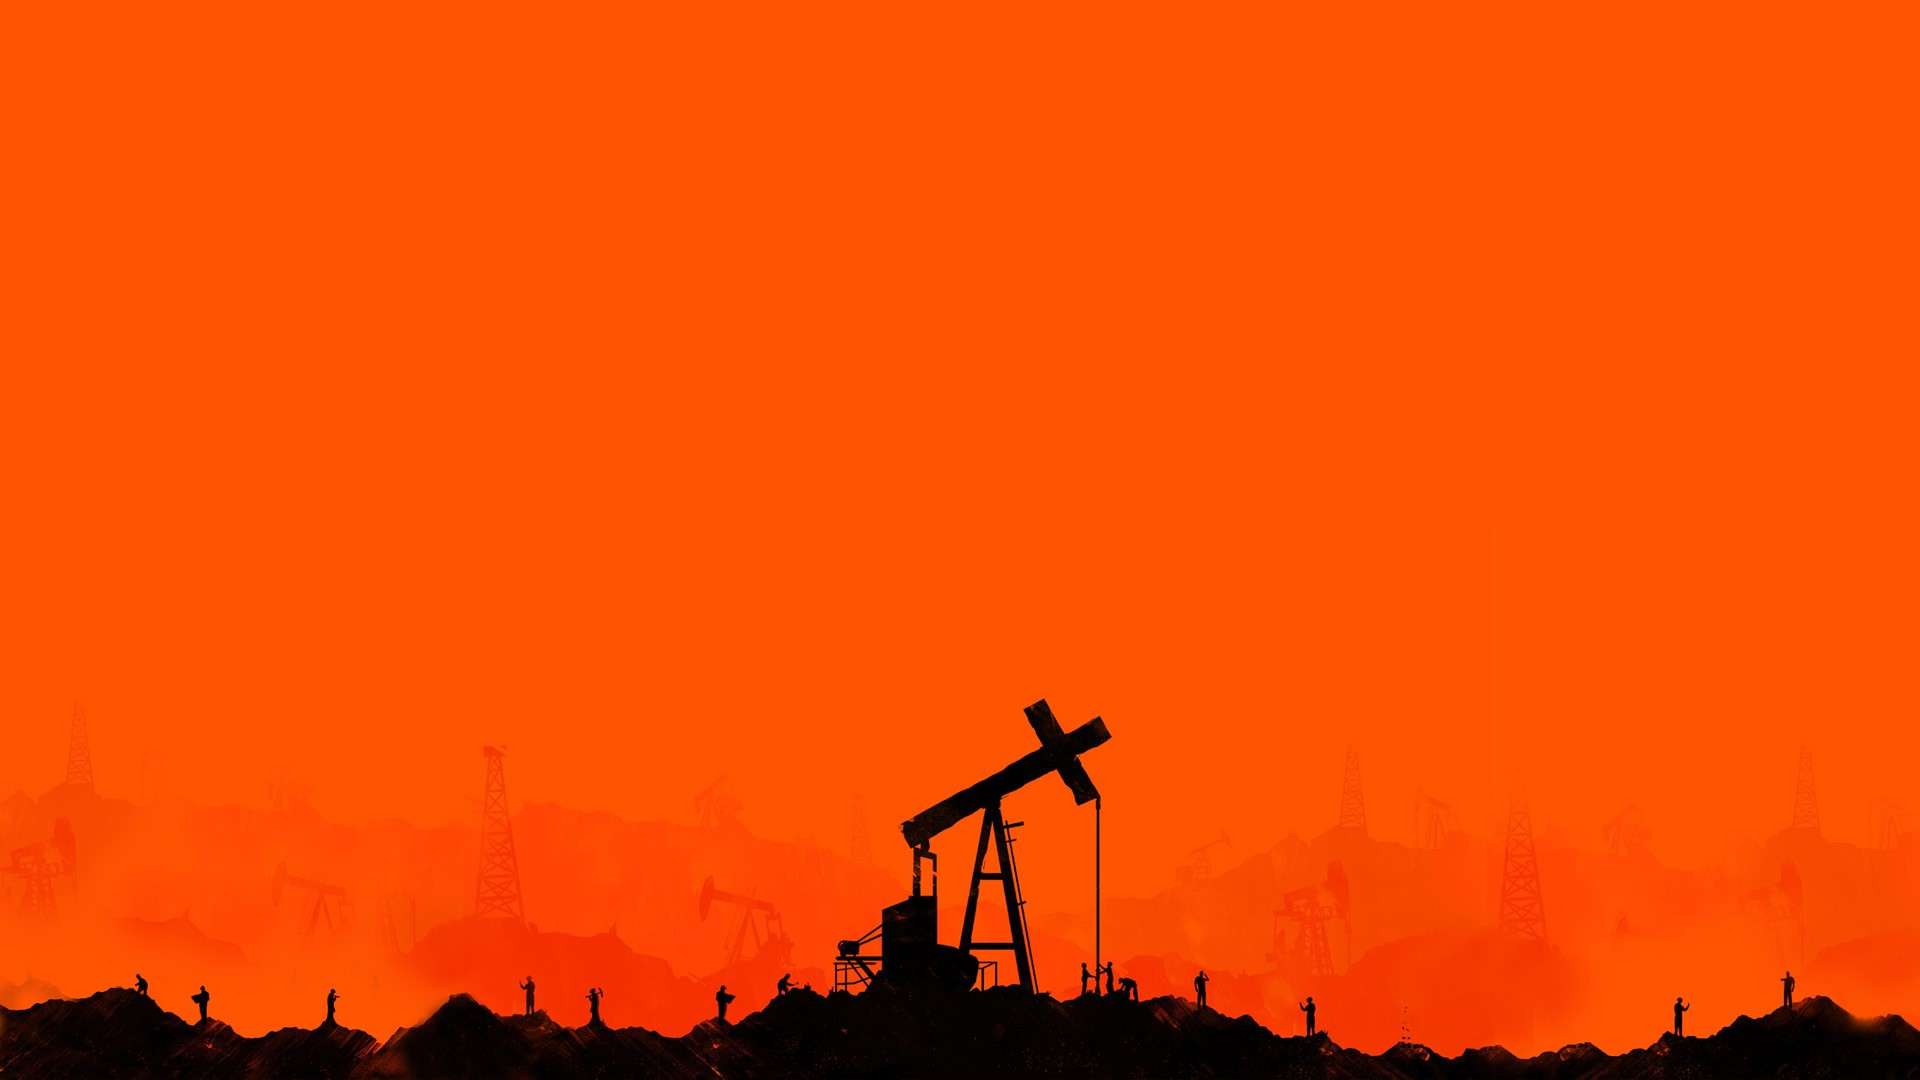 General 1920x1080 There Will be Blood movies poster movie poster cross oil pump orange orange background